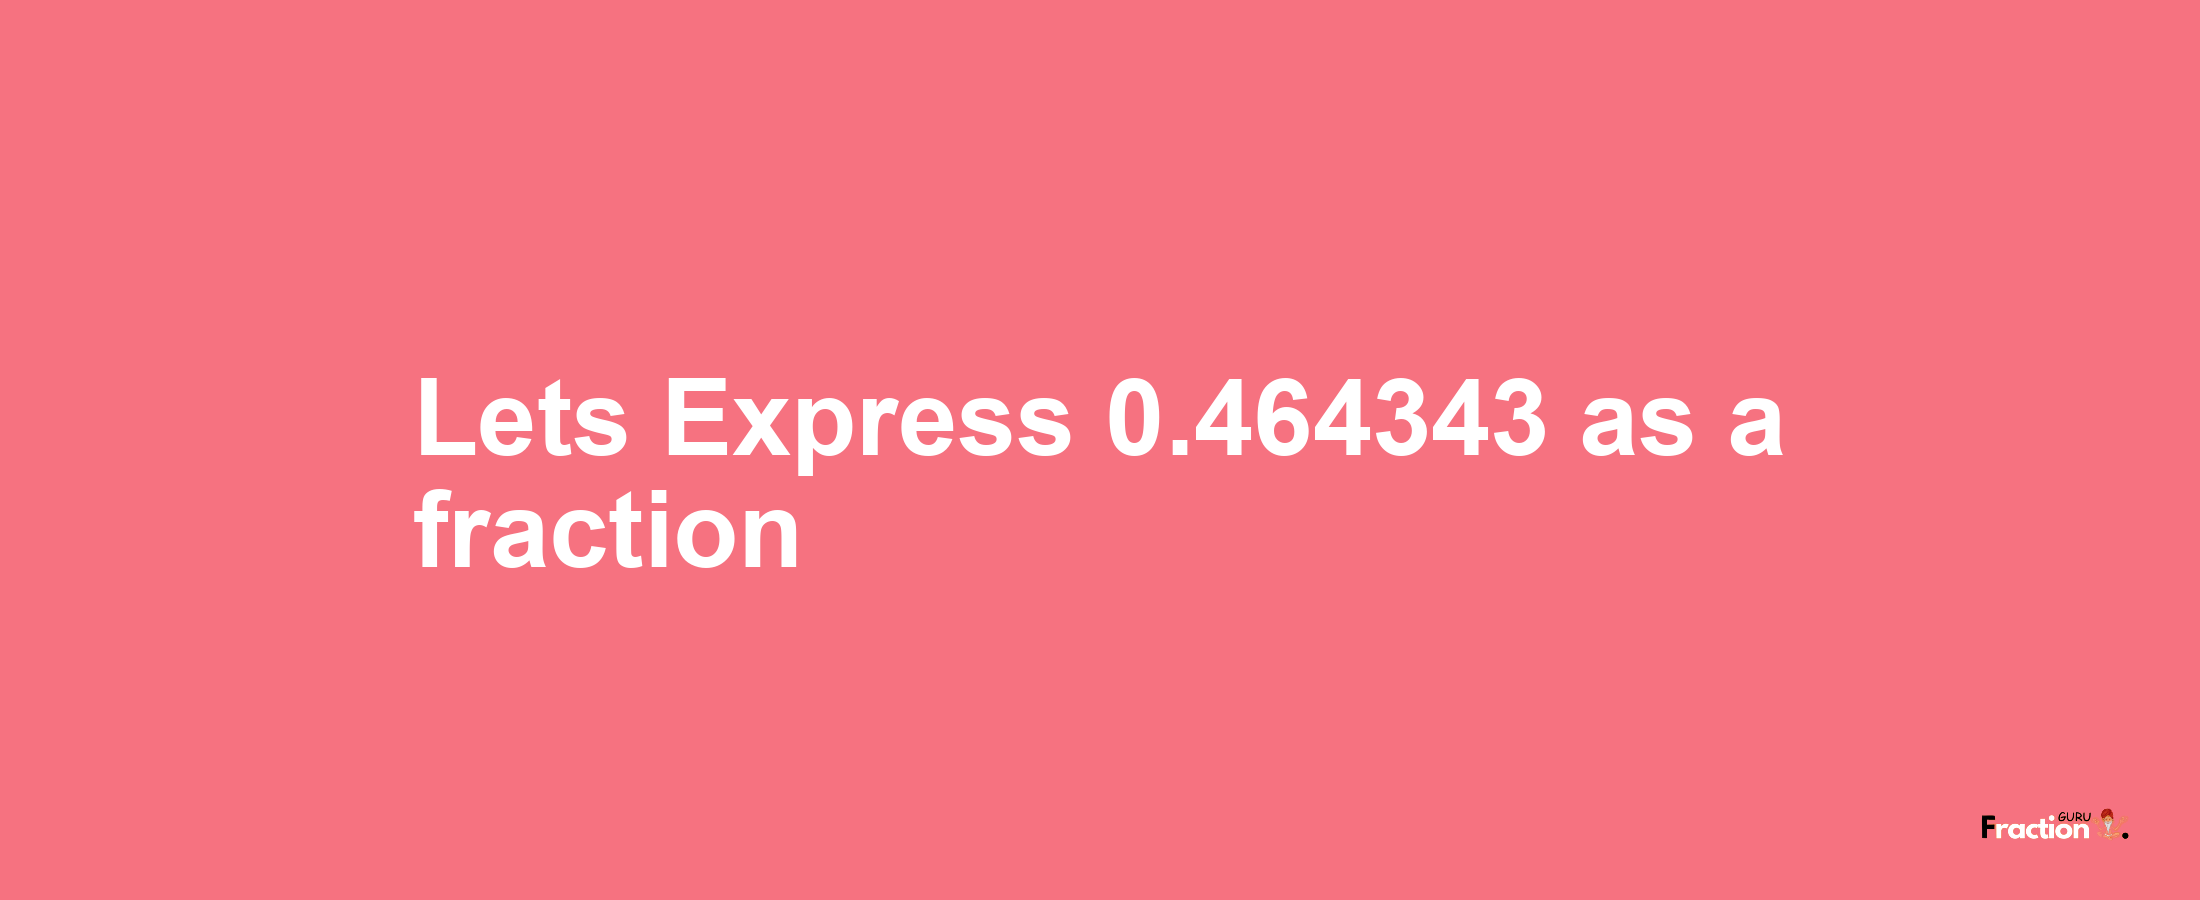 Lets Express 0.464343 as afraction